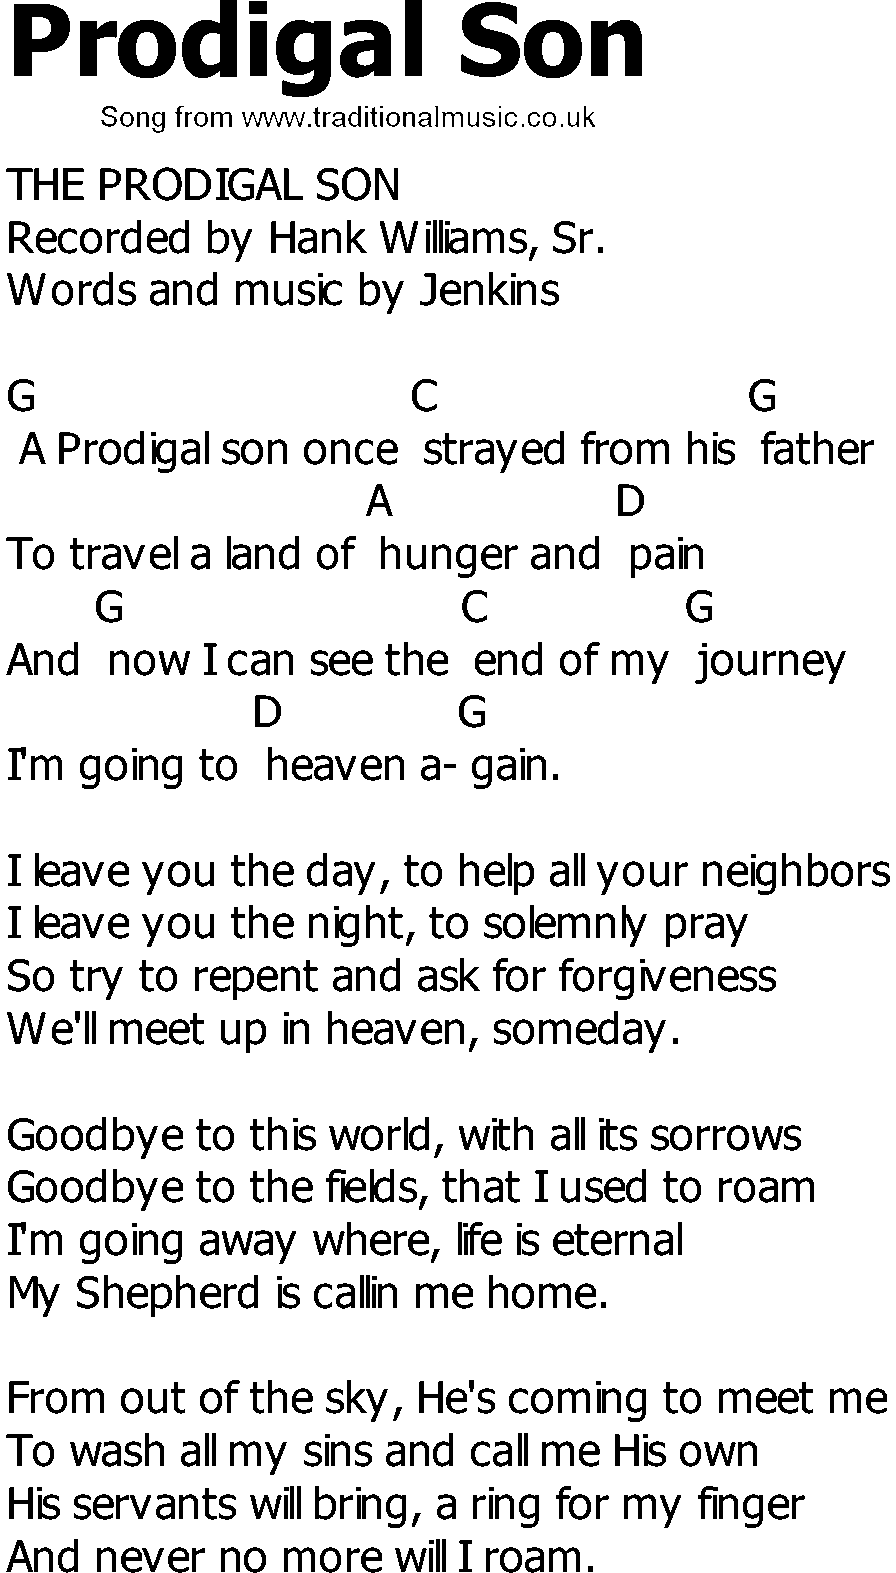 Old Country song lyrics with chords - Prodigal Son